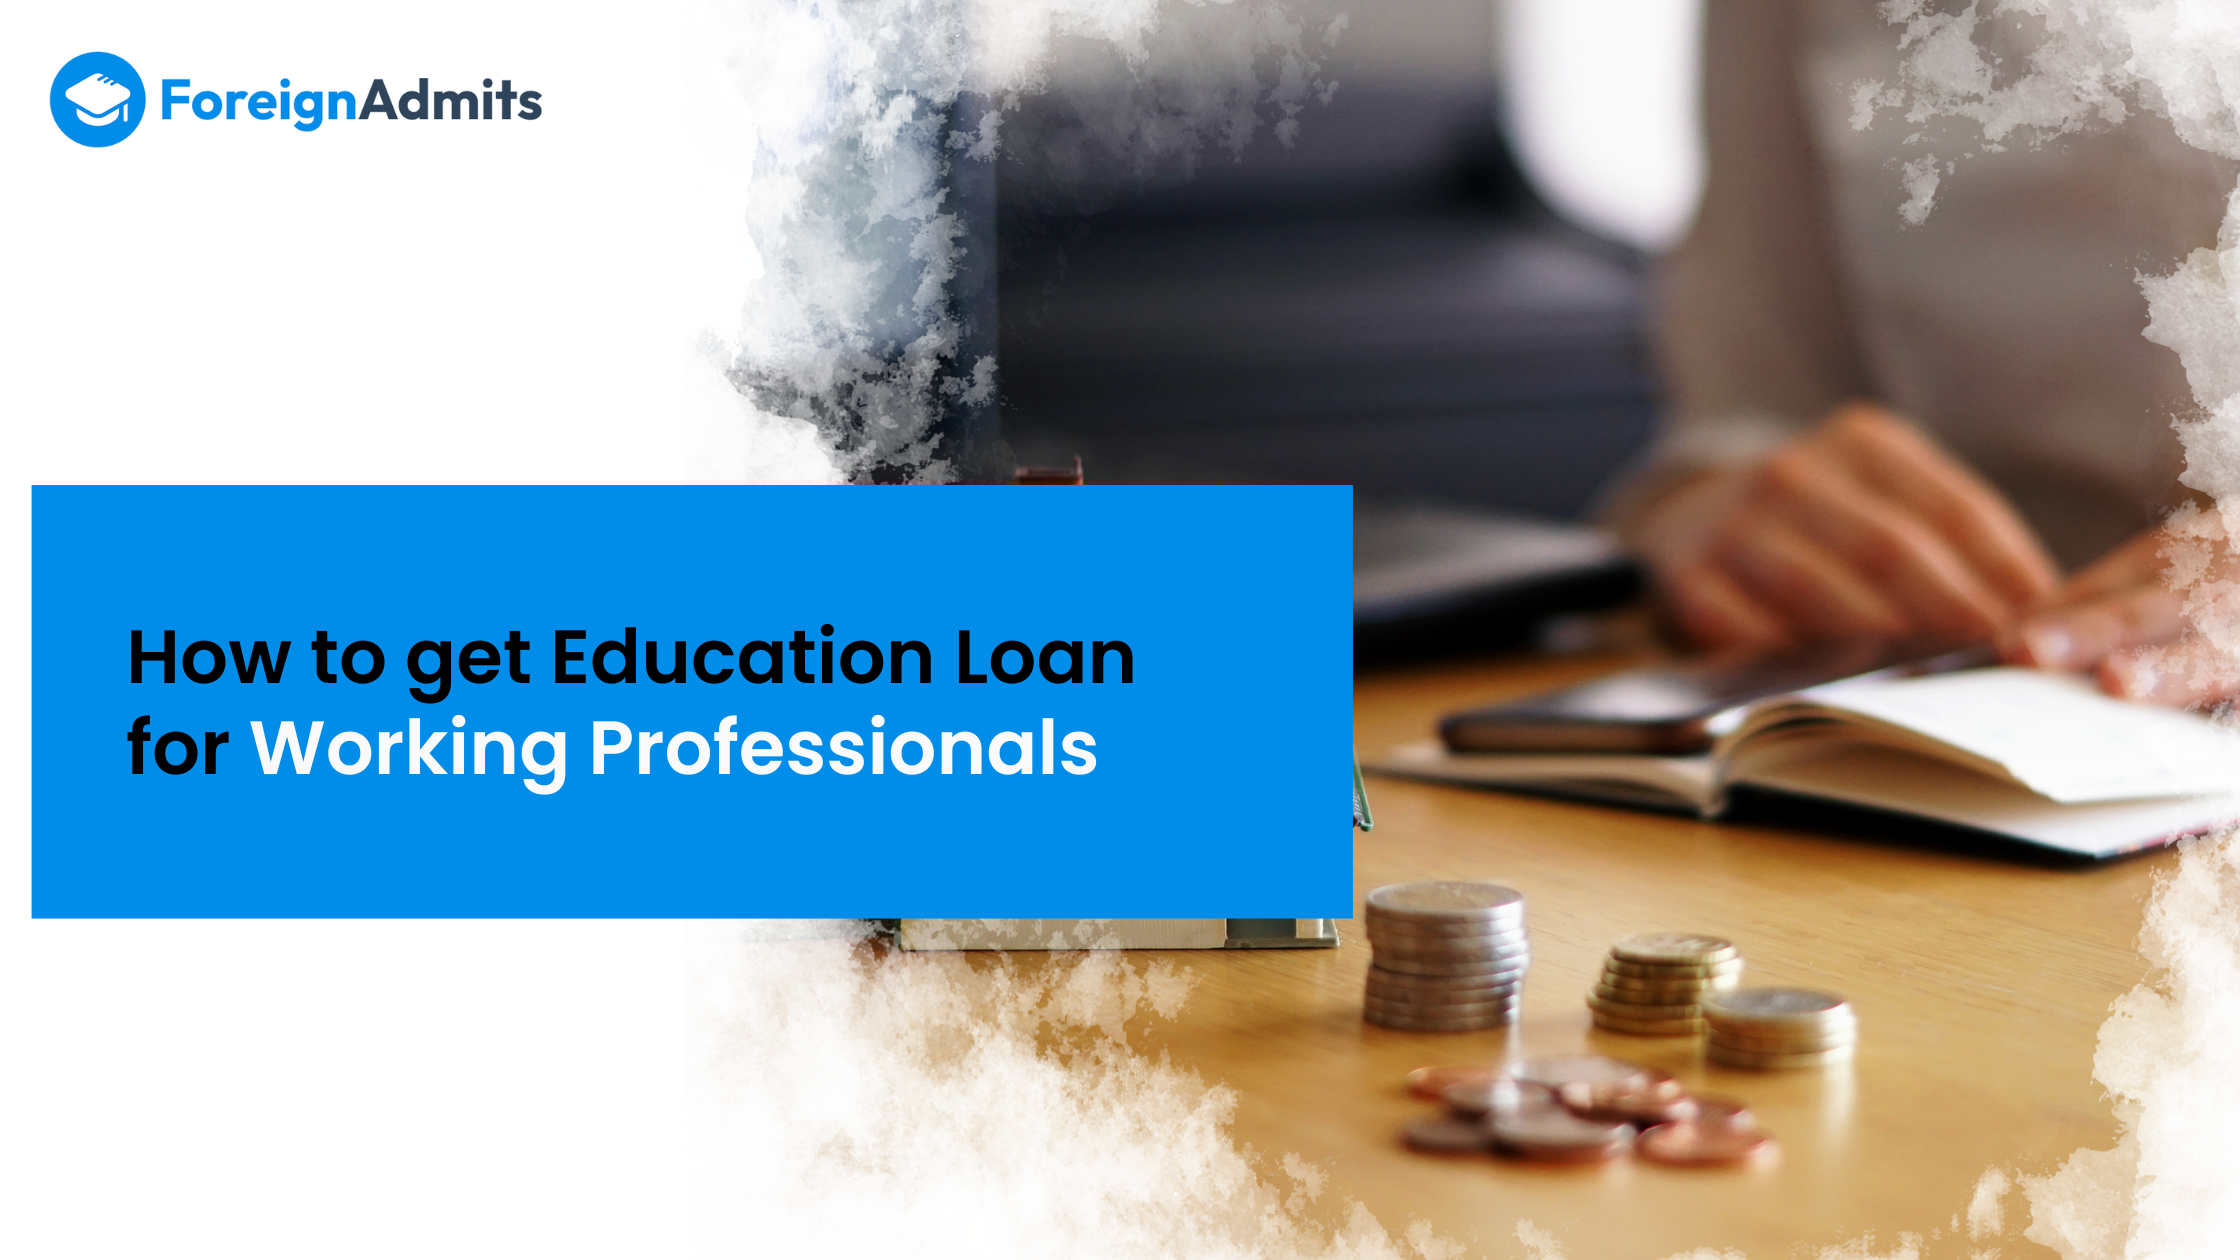 How to get Educational Loan for Working Professionals